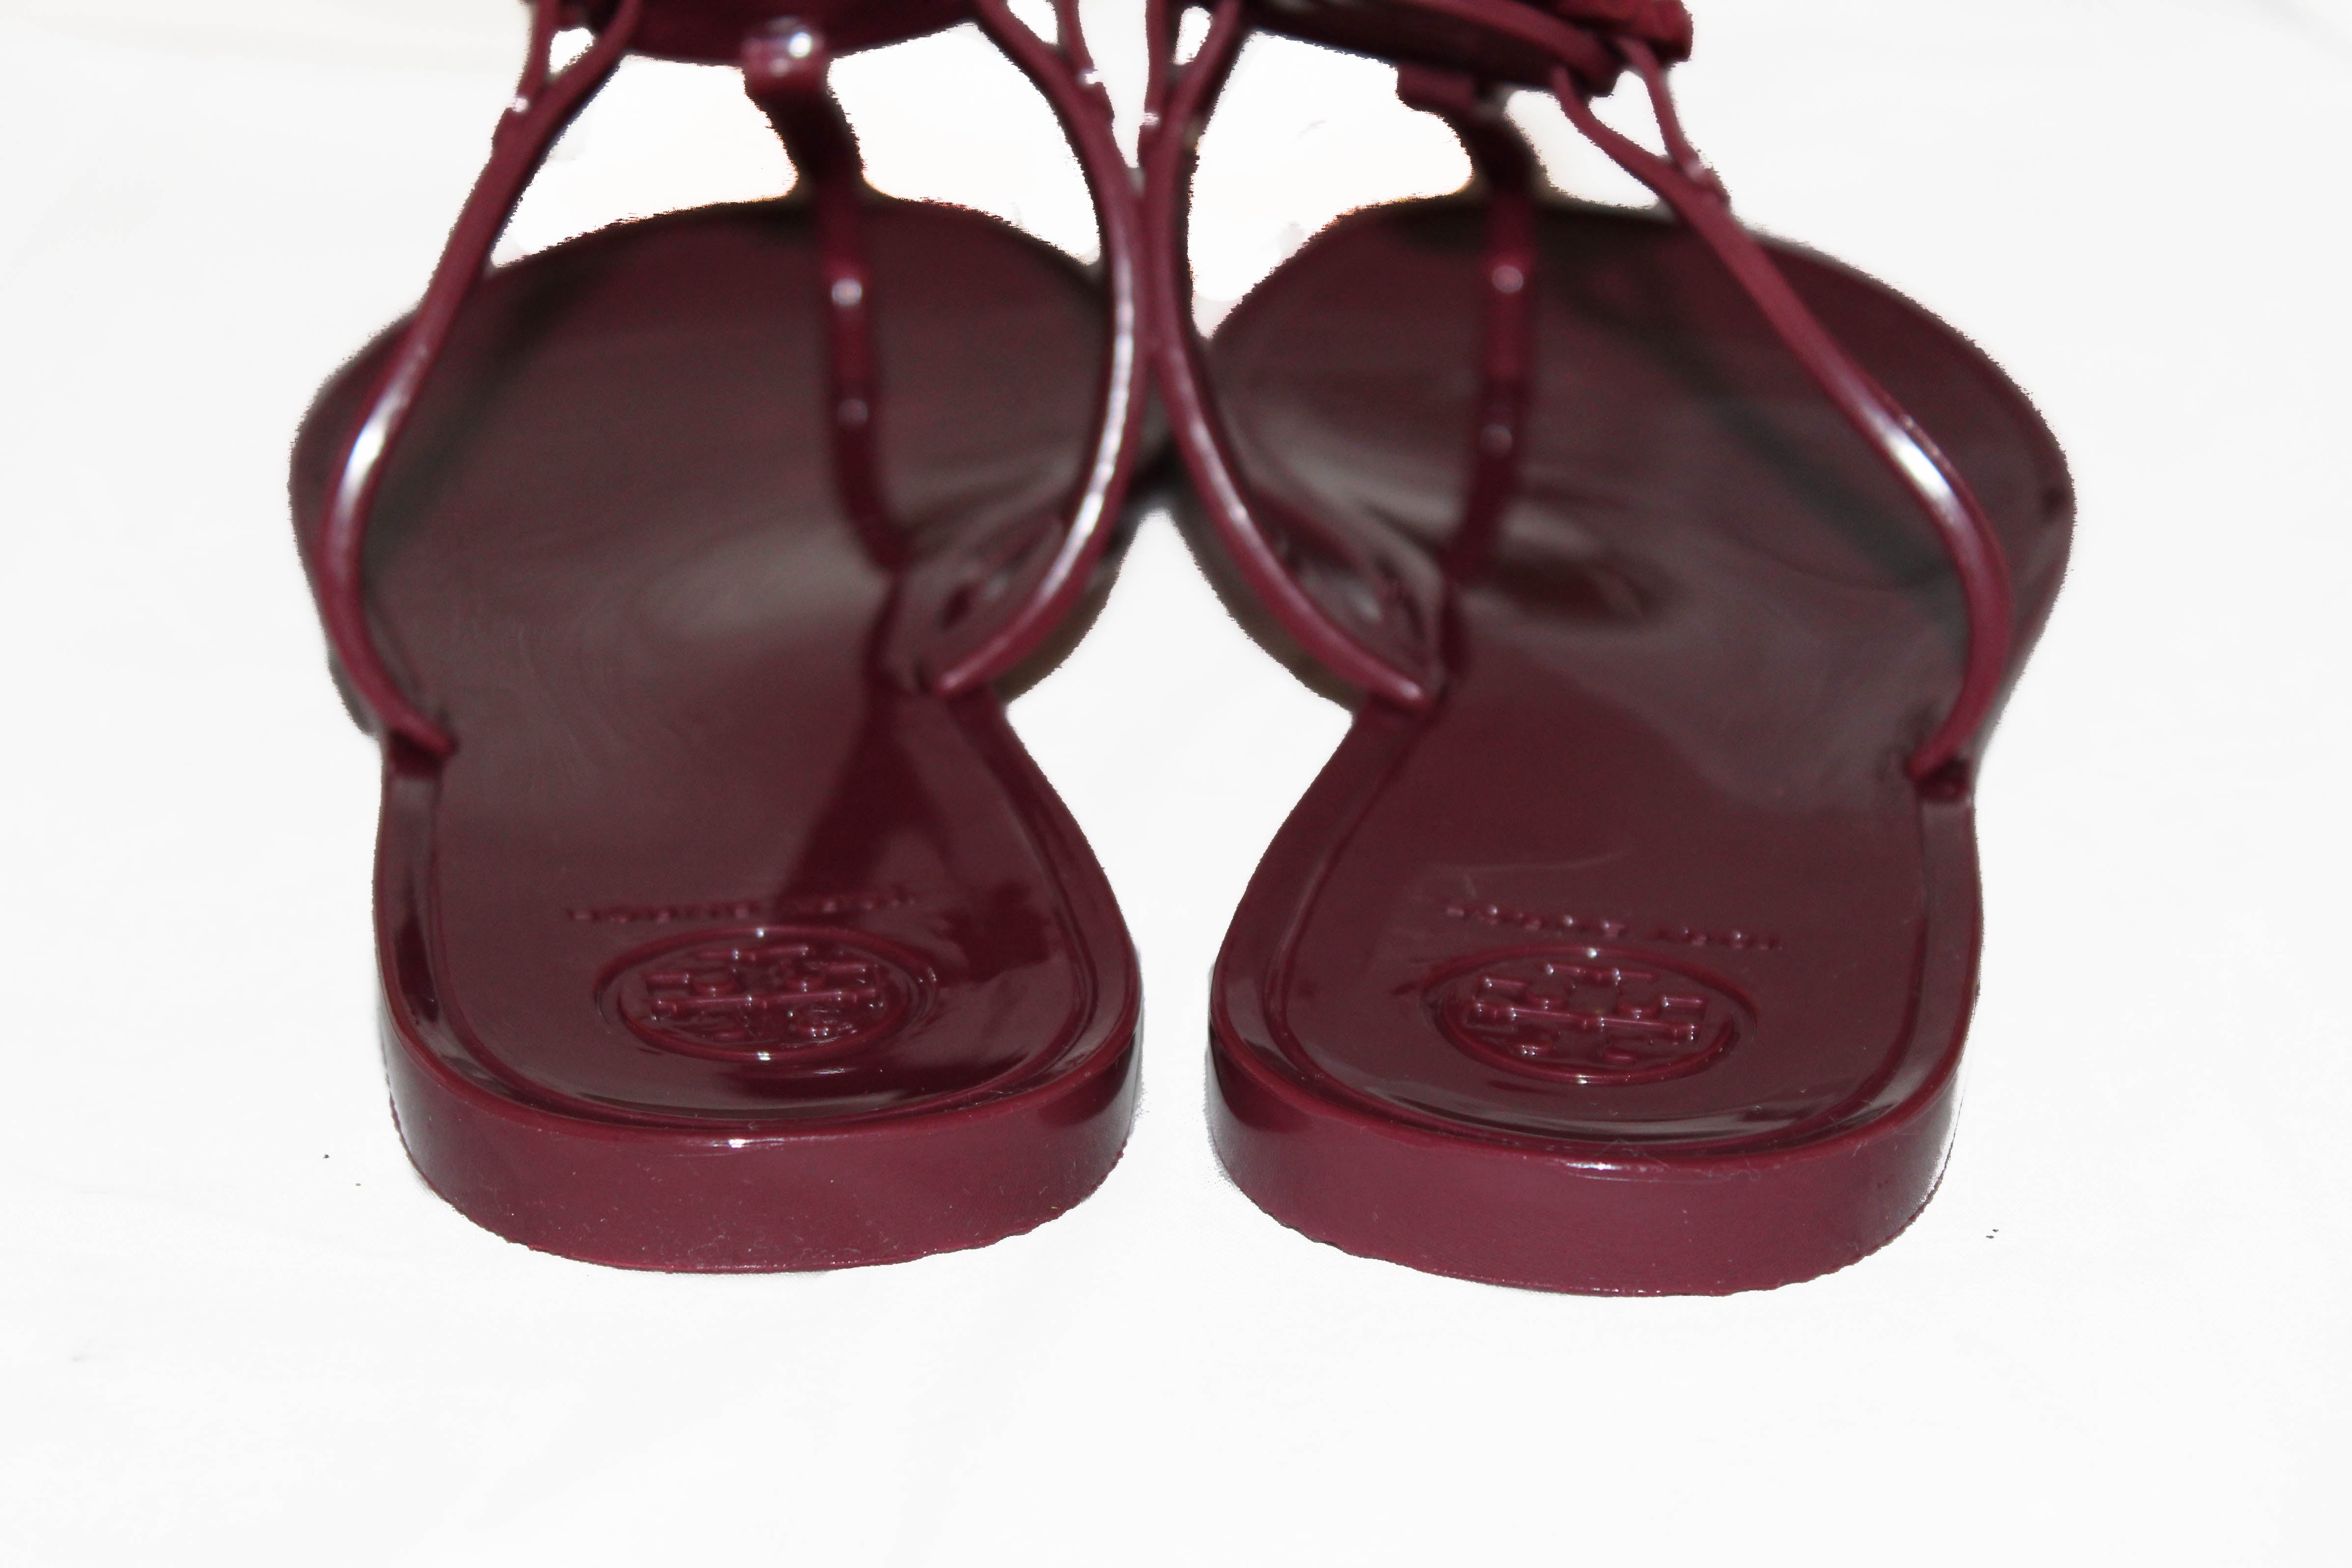 Authentic Tory Burch Burgundy Jelly Sandal Size 7M